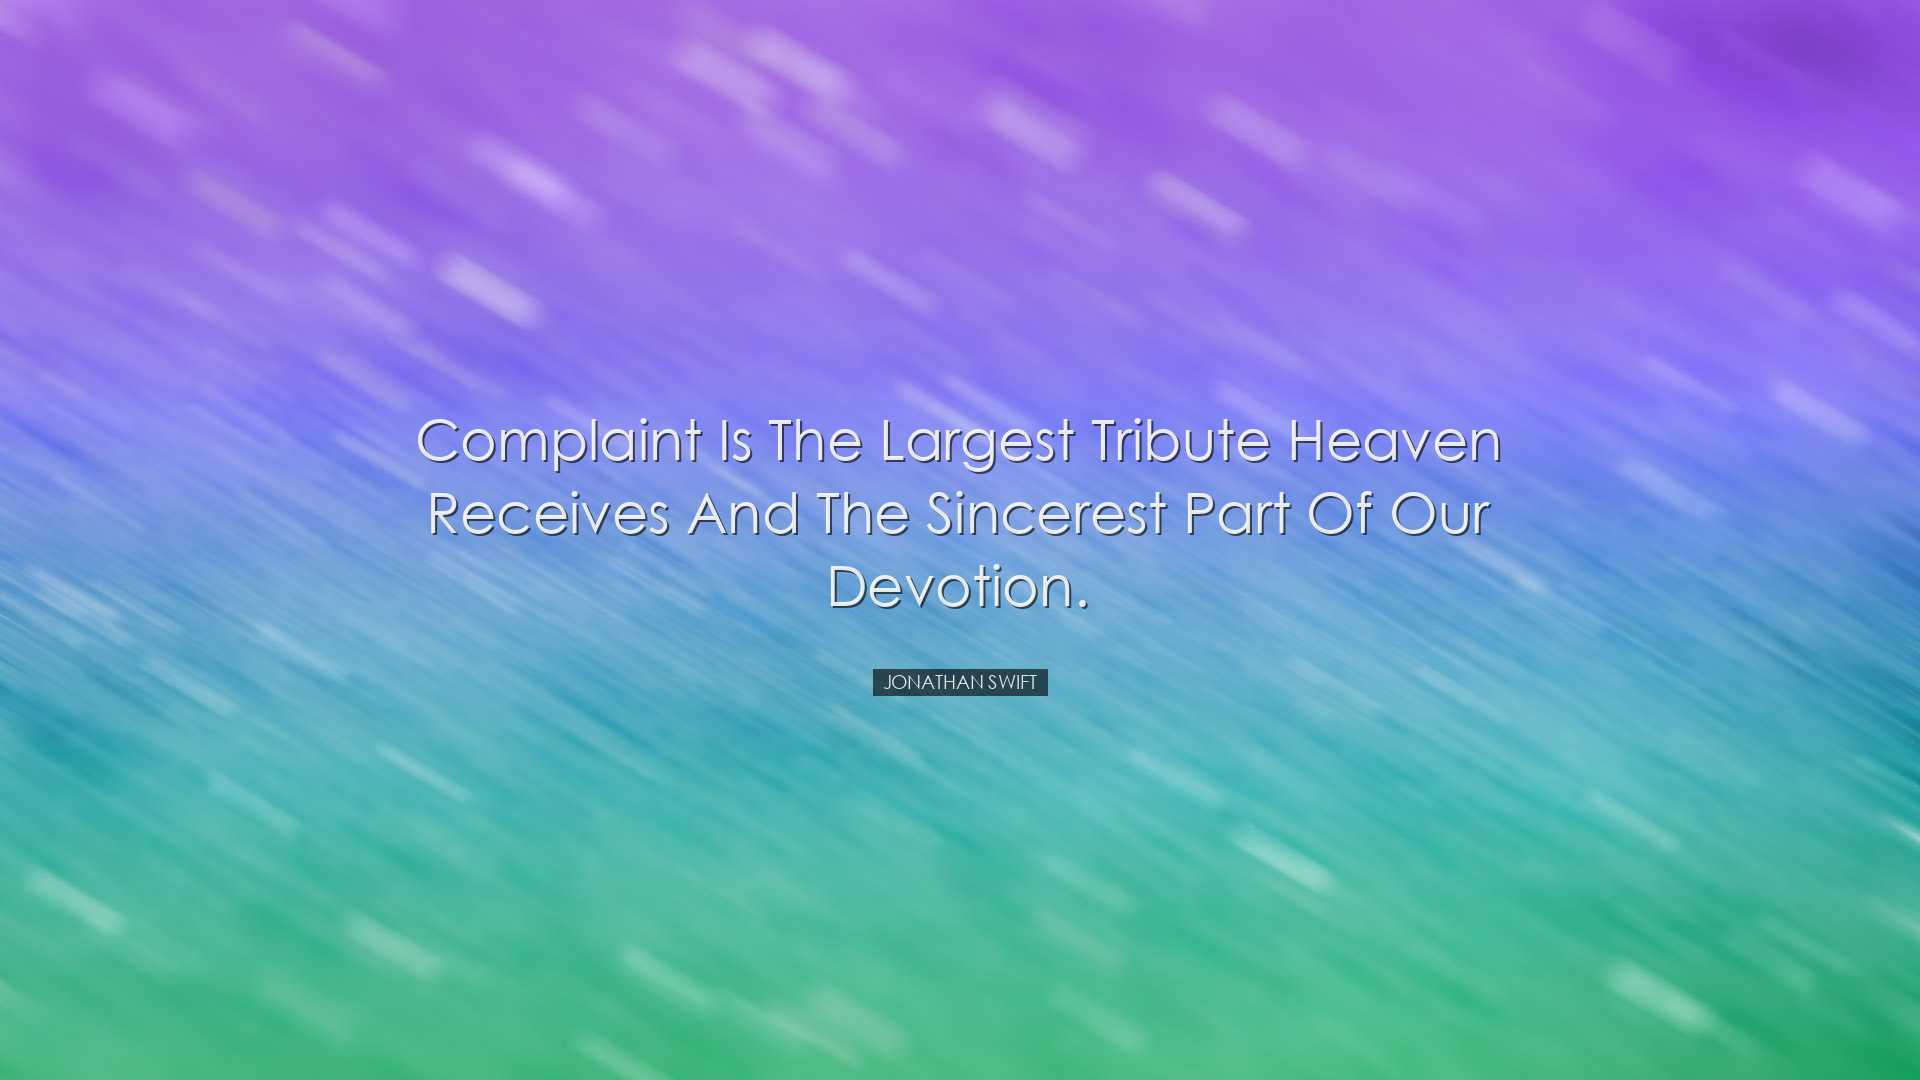 Complaint is the largest tribute heaven receives and the sincerest